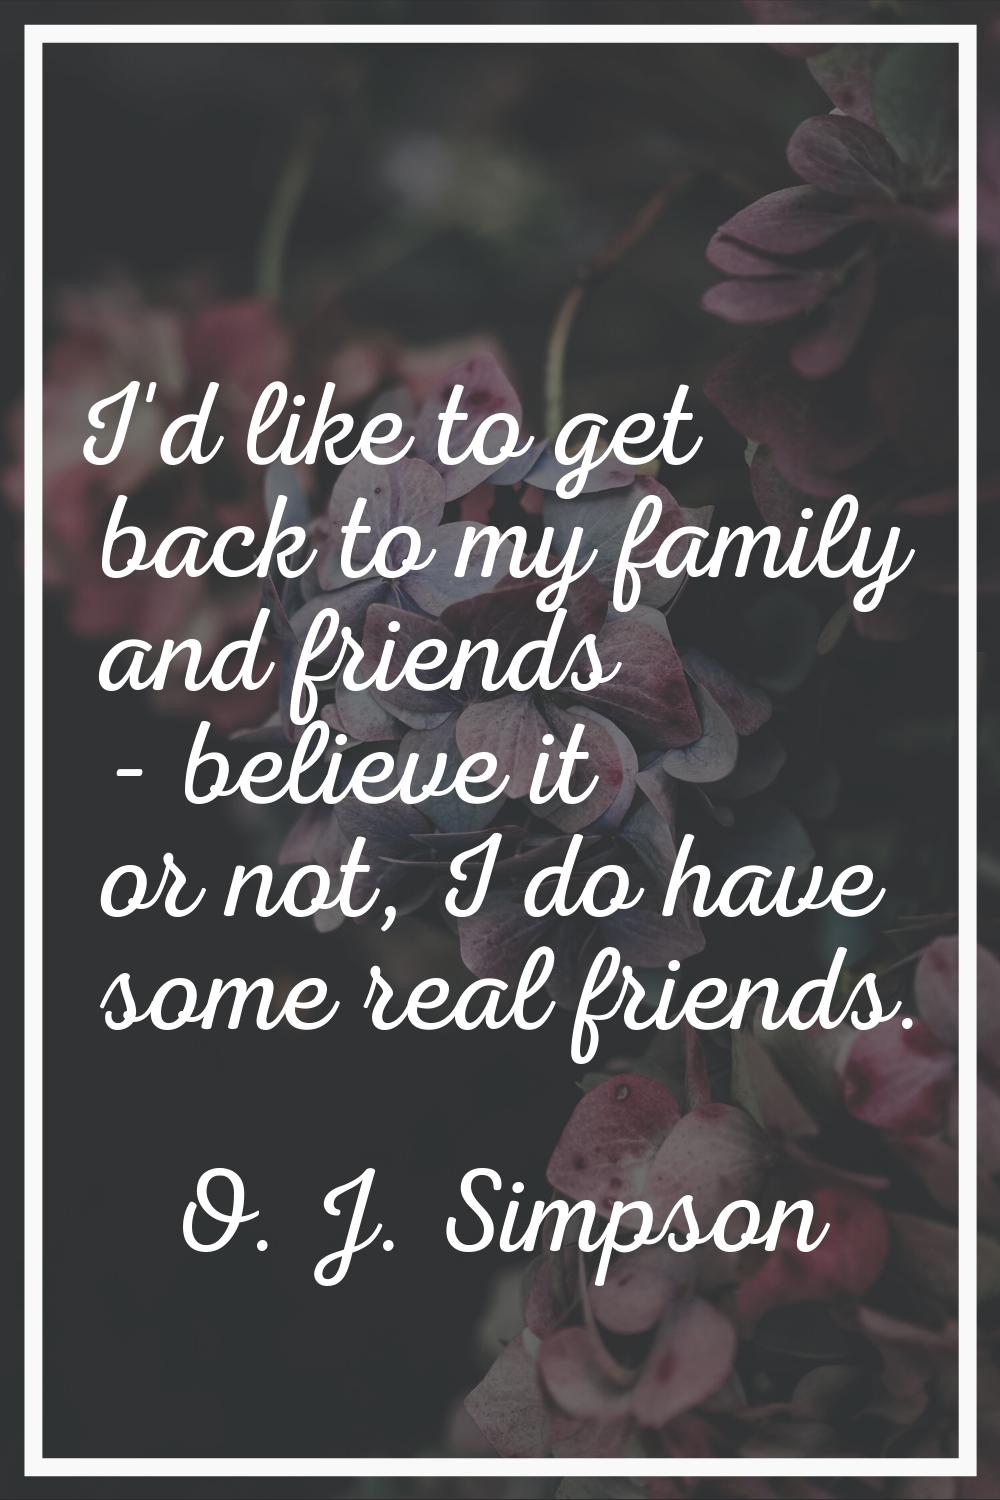 I'd like to get back to my family and friends - believe it or not, I do have some real friends.